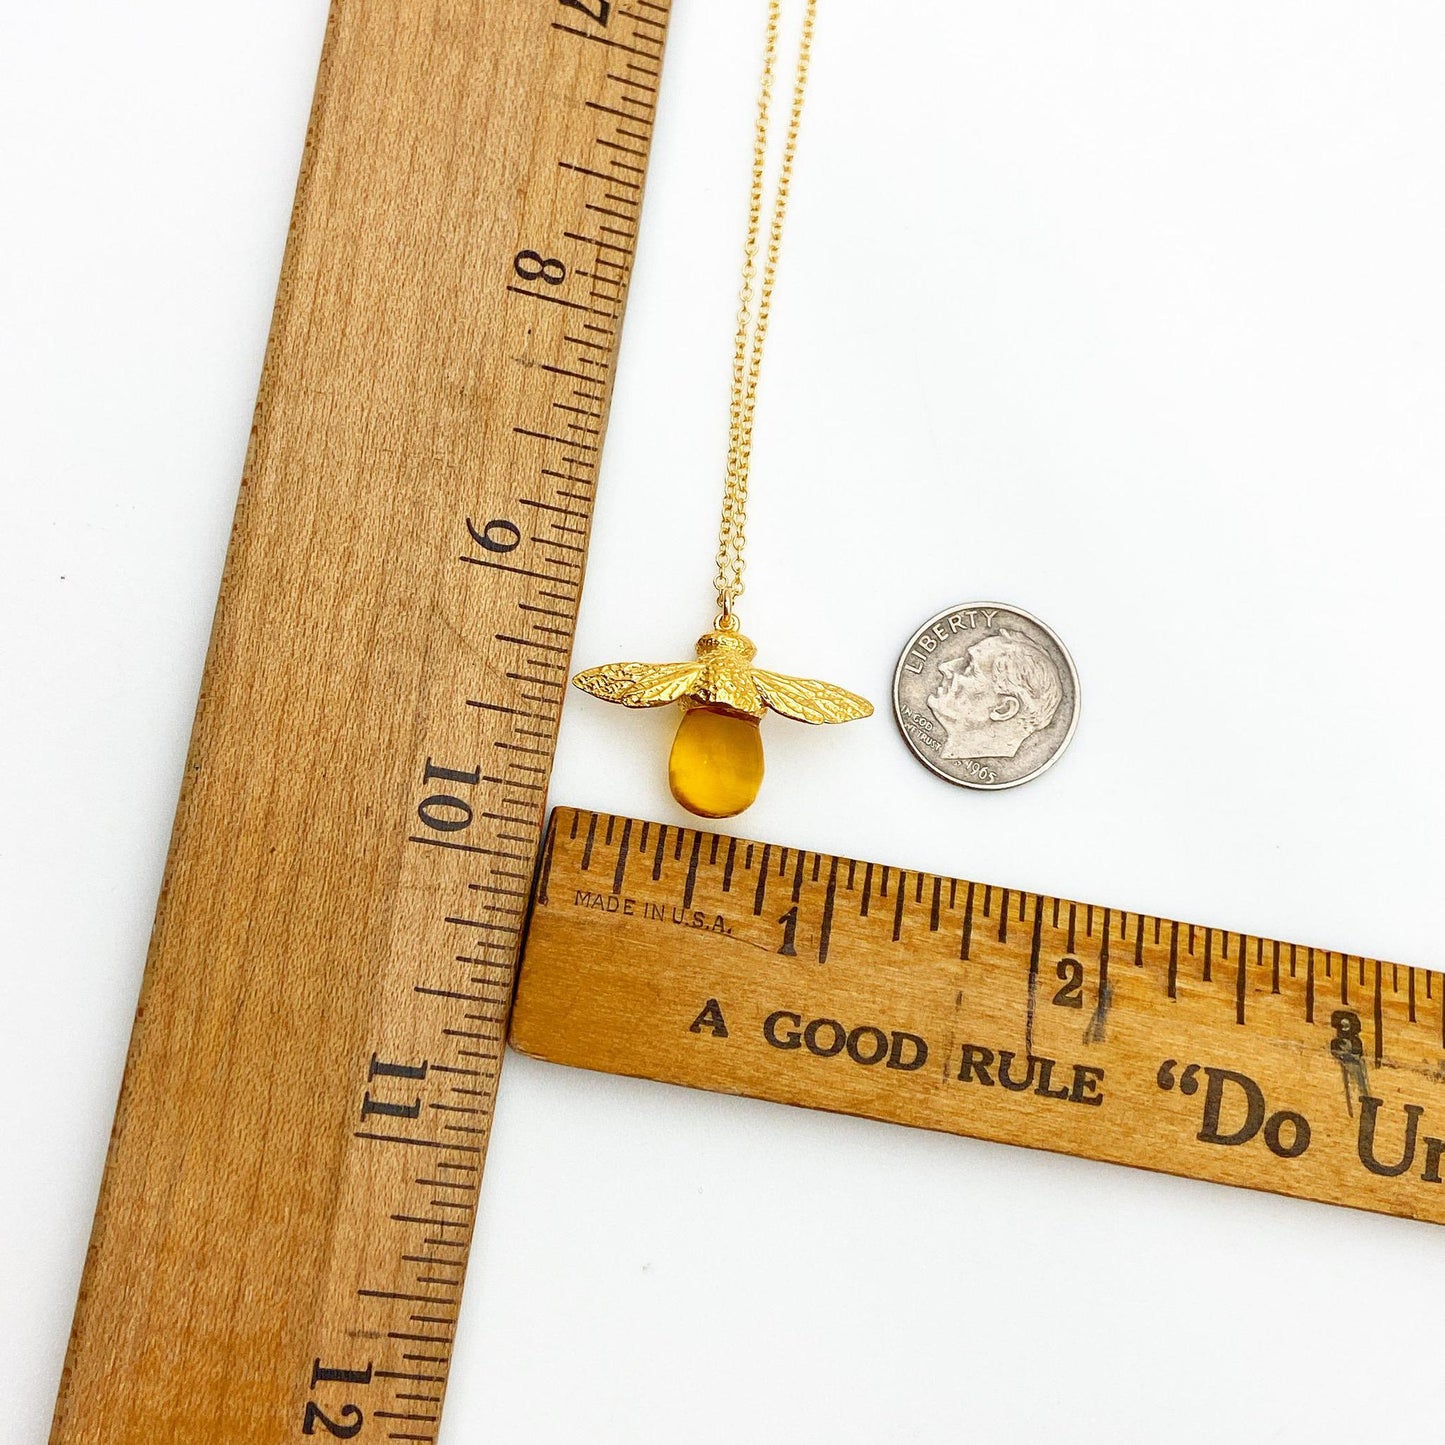 Necklace - Bee with Citrine Stone - Gold Vermeil